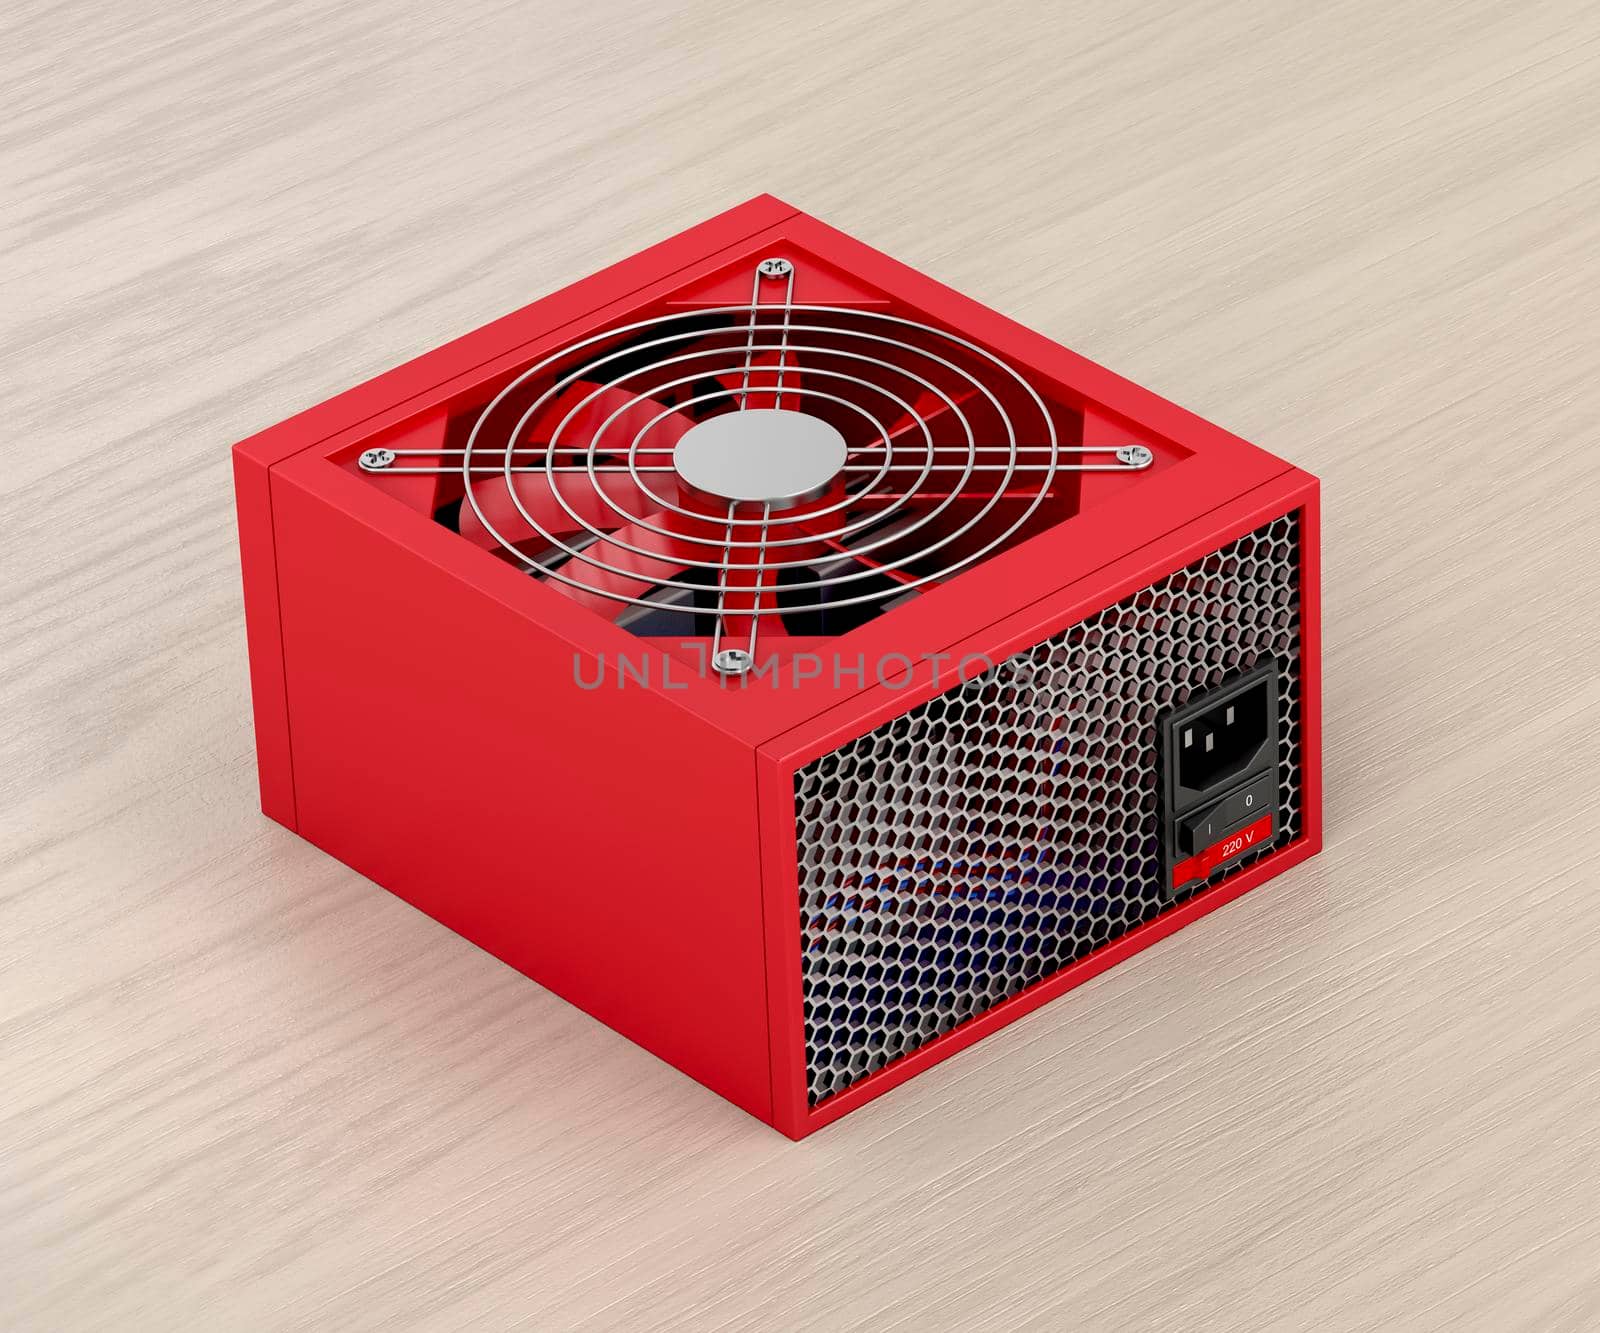 Computer power supply unit by magraphics